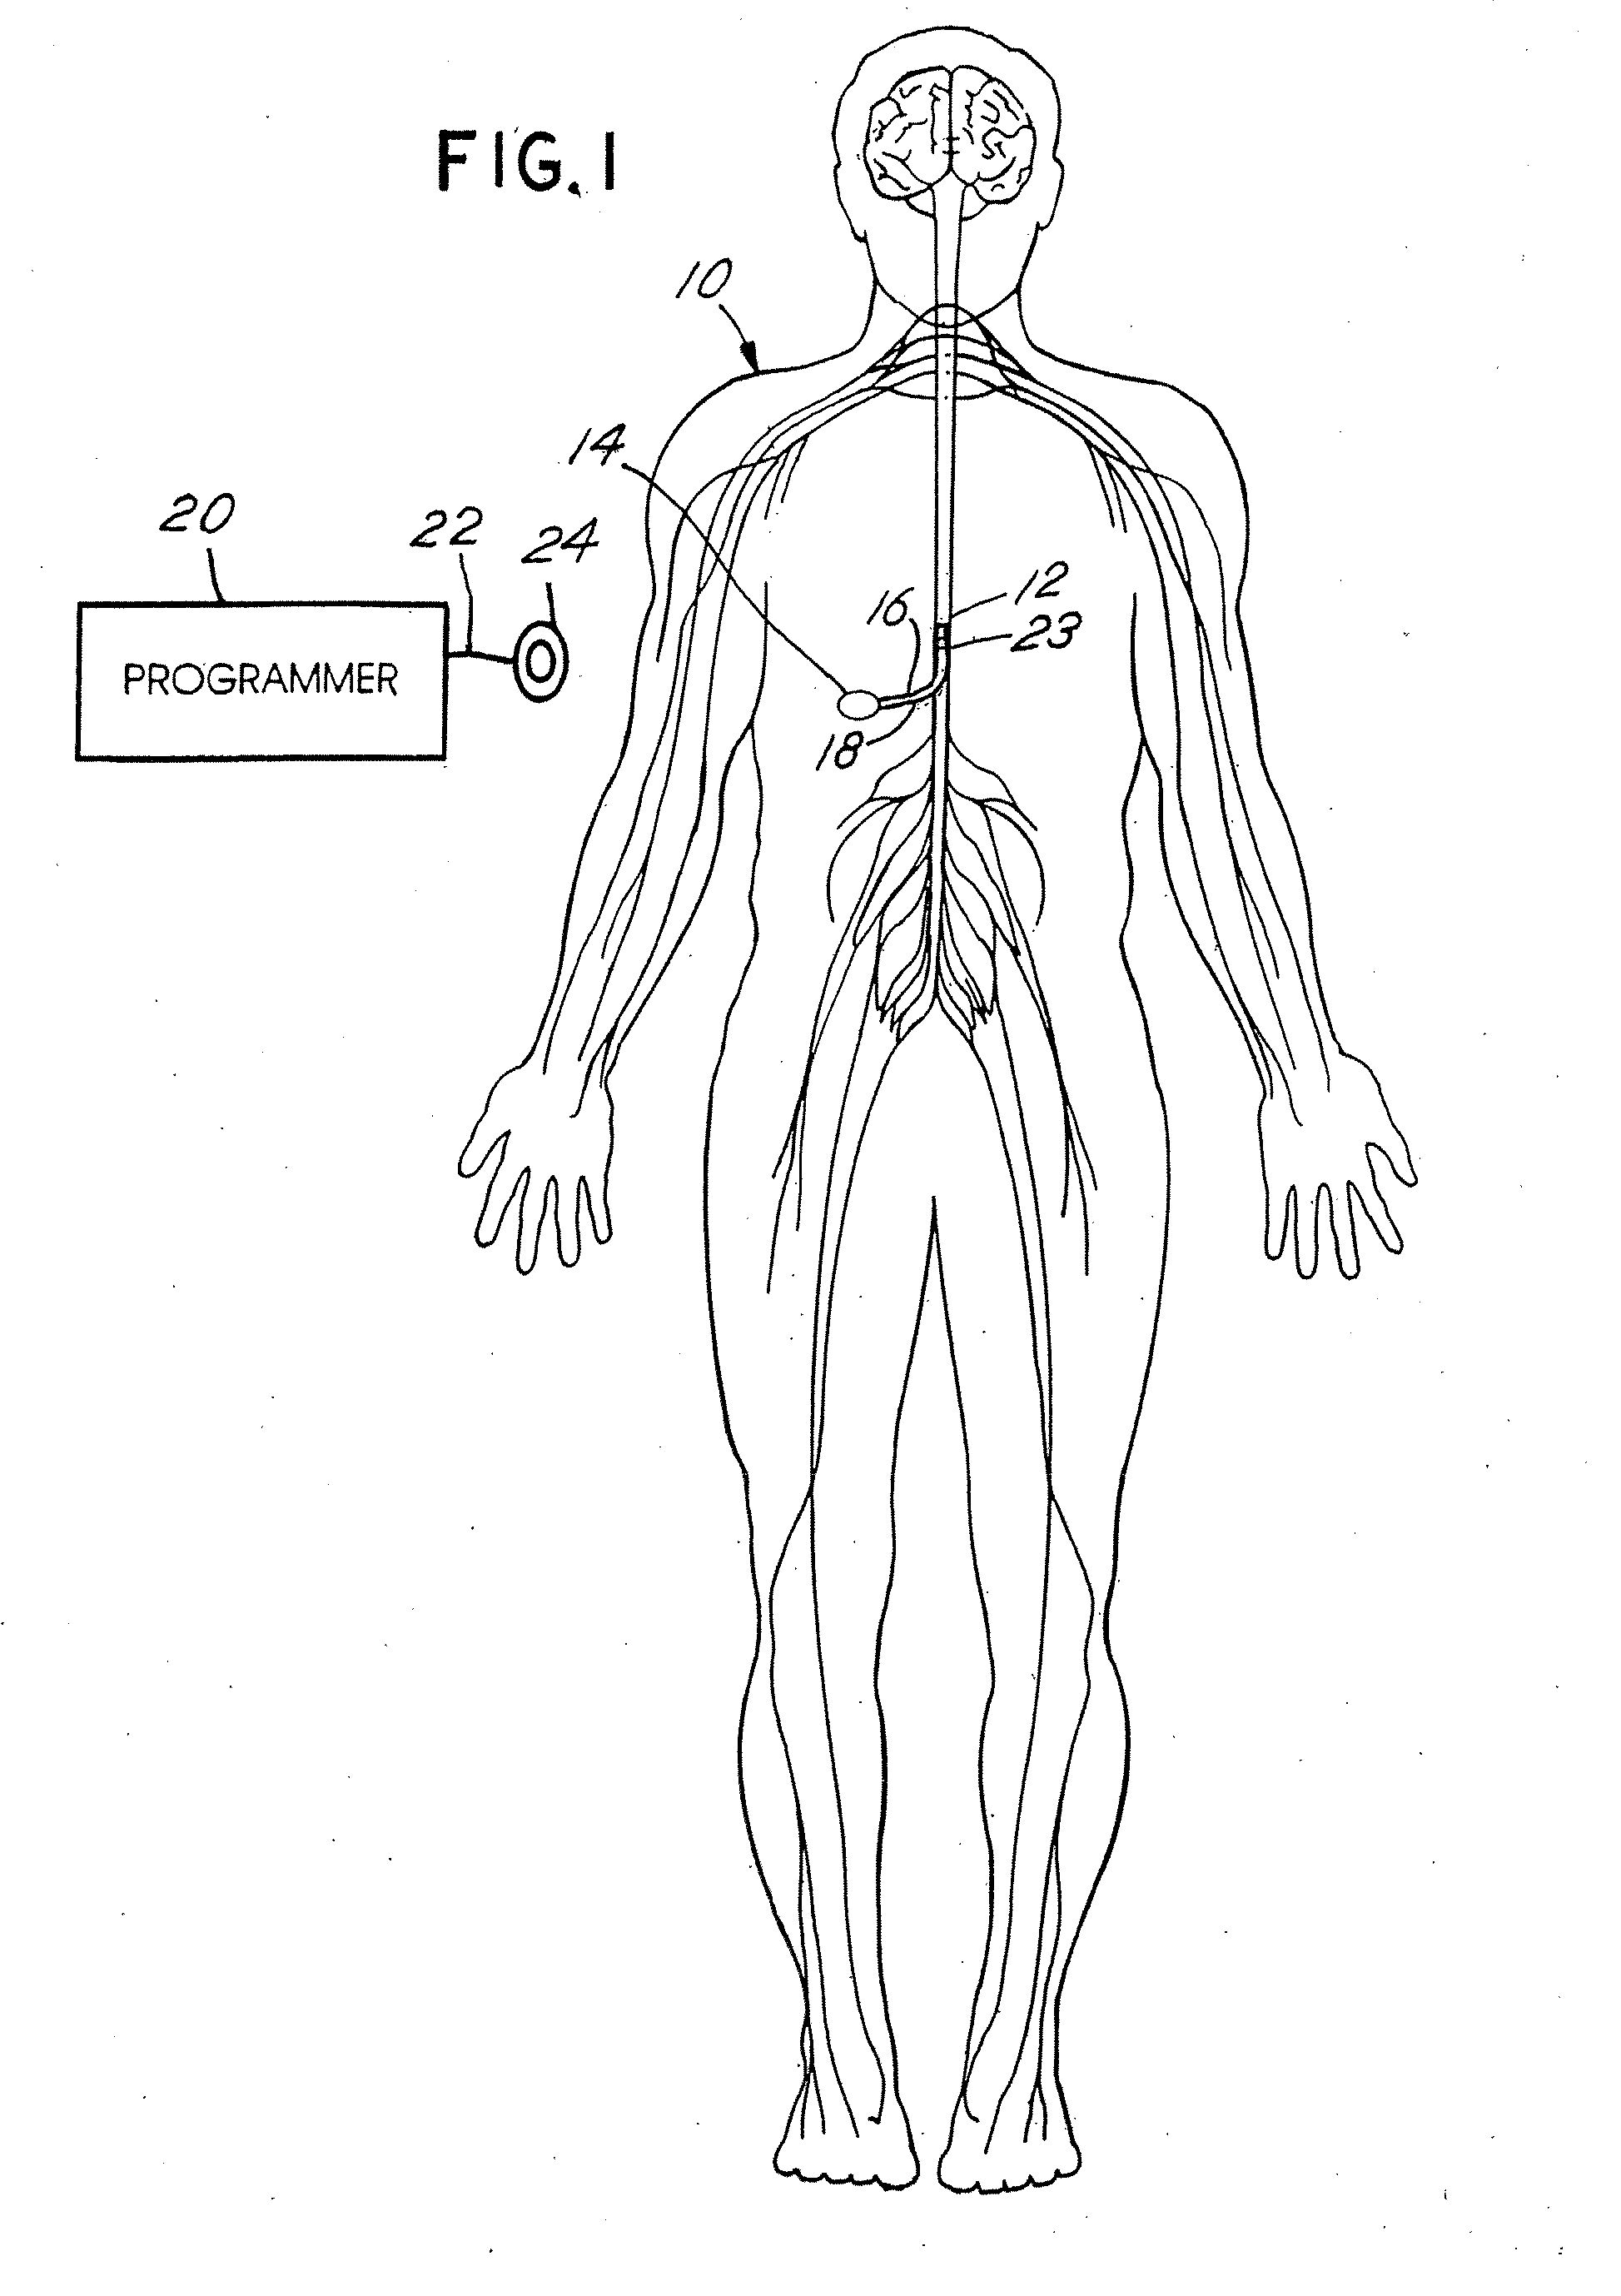 Techniques for positioning therapy delivery elements within a spinal cord or brain